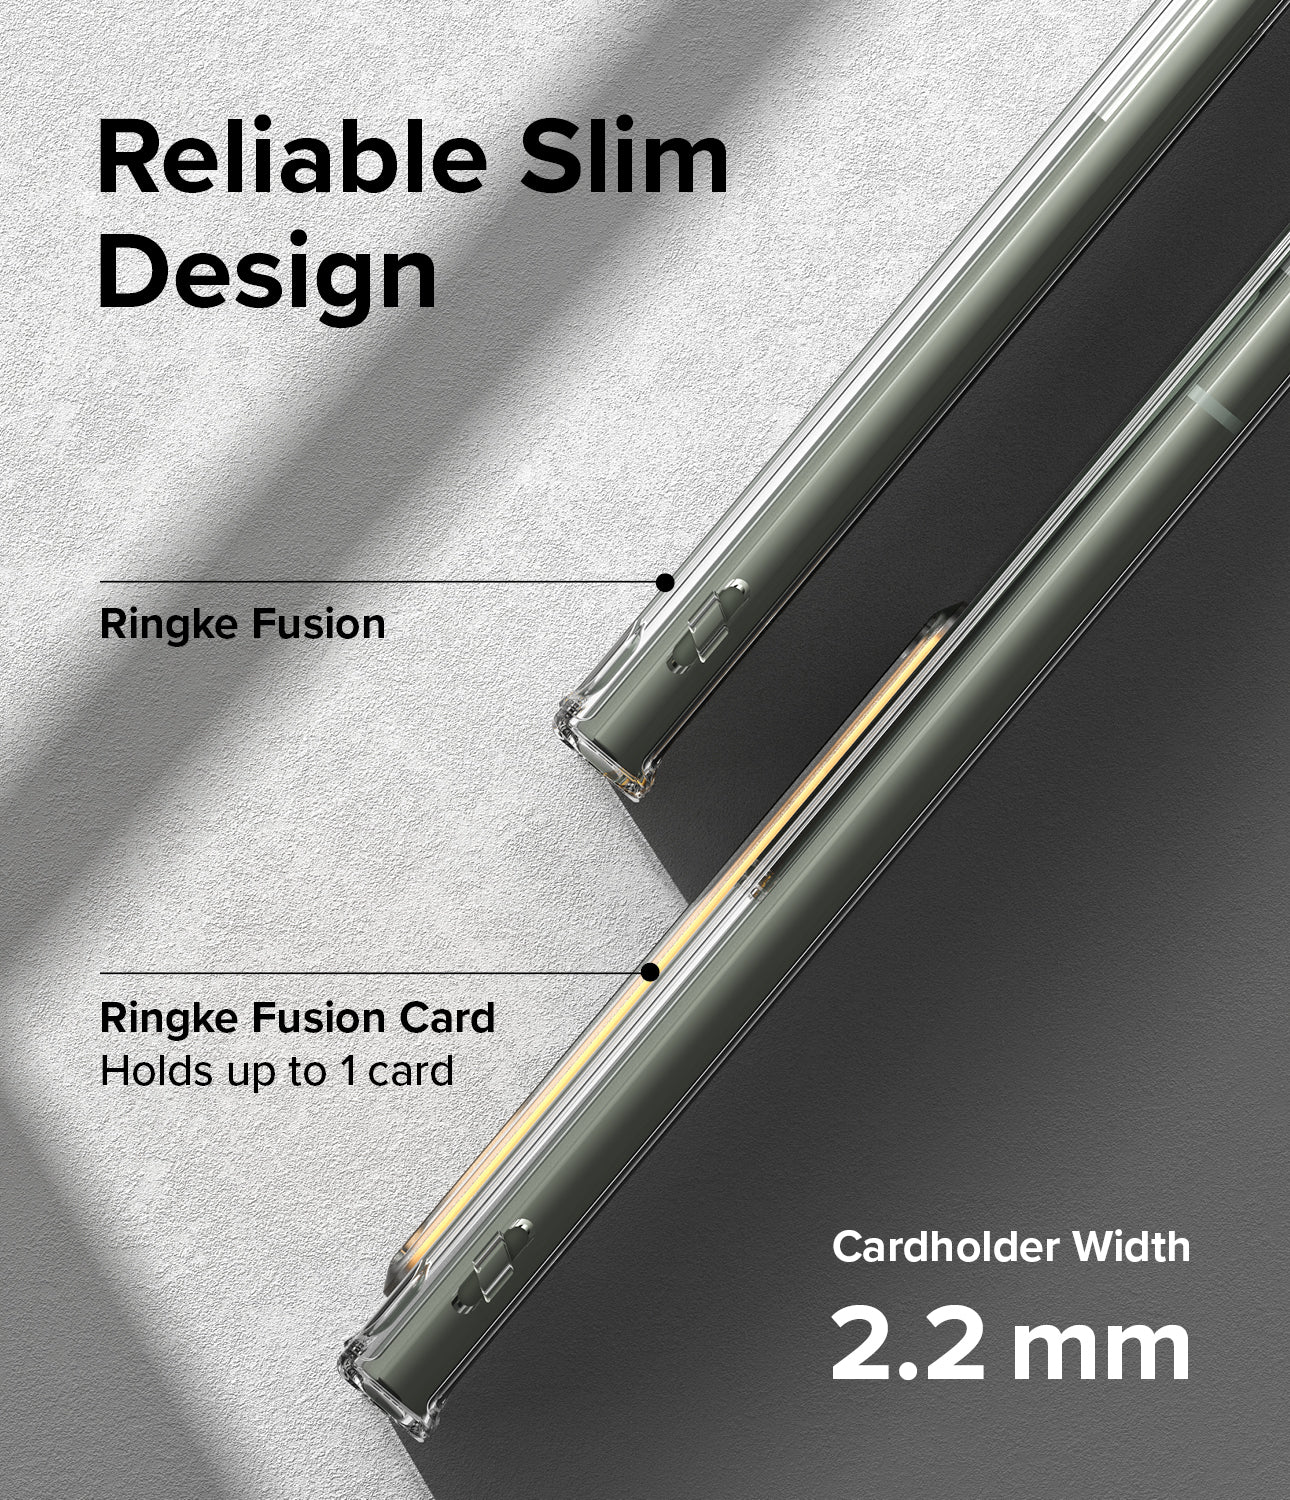 Reliable Slim Design l Ringke Fusion / Ringke Fusion Card - Holds up to 1 card. Cardholder Width: 2.2 mm